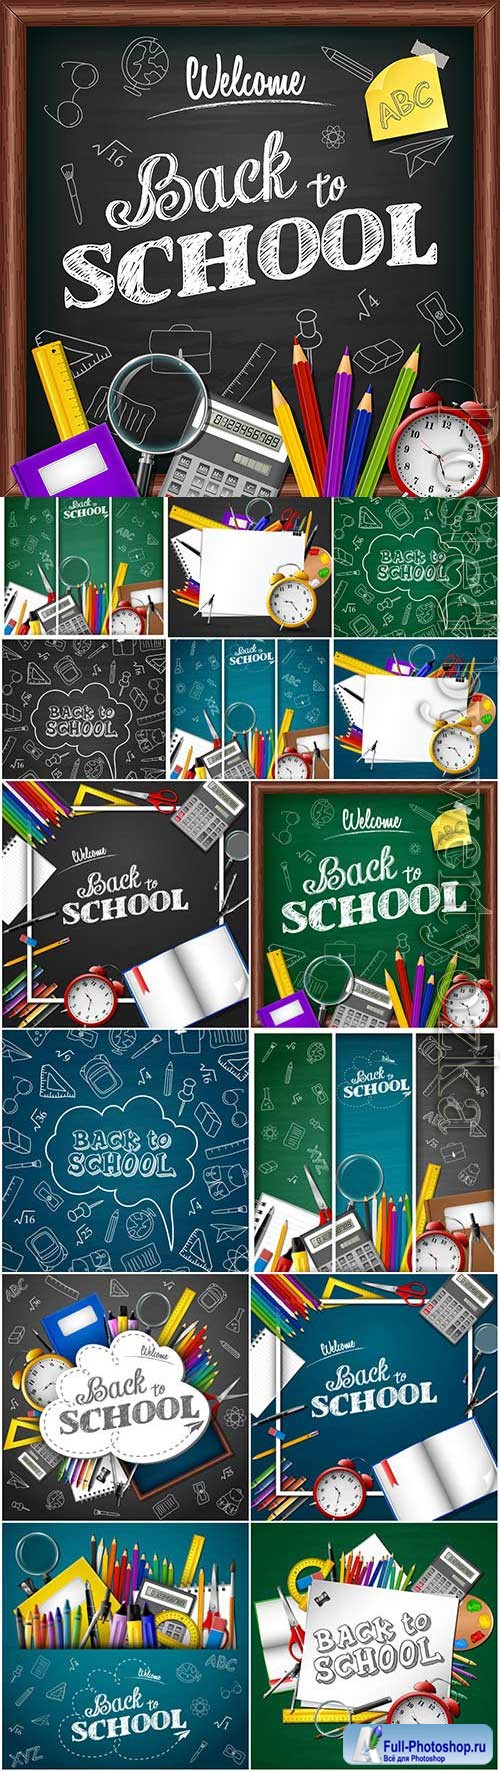 Back to school posters in vector